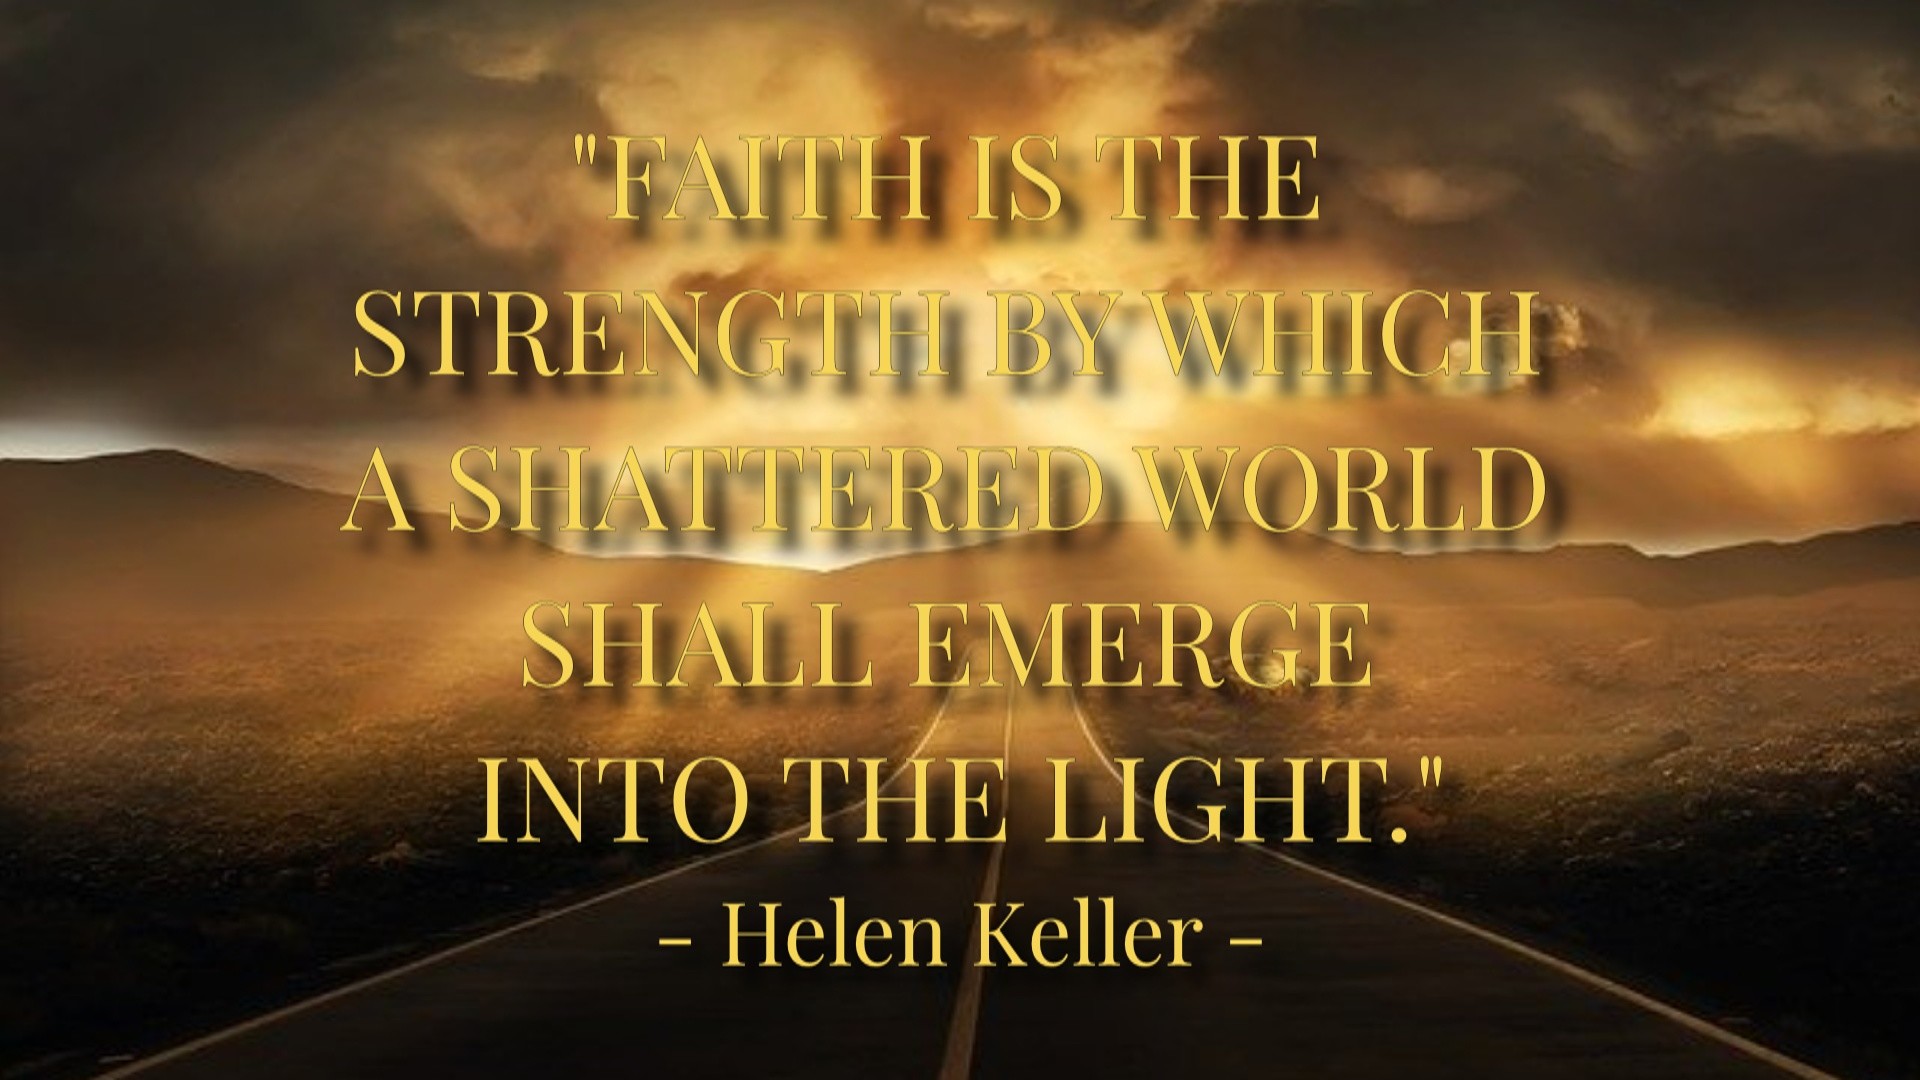 FAITH IS THE STRENGTH BY WHICH A SHATTERED WORLD SHALL EMERGE INTO THE LIGHT. Helen Keller